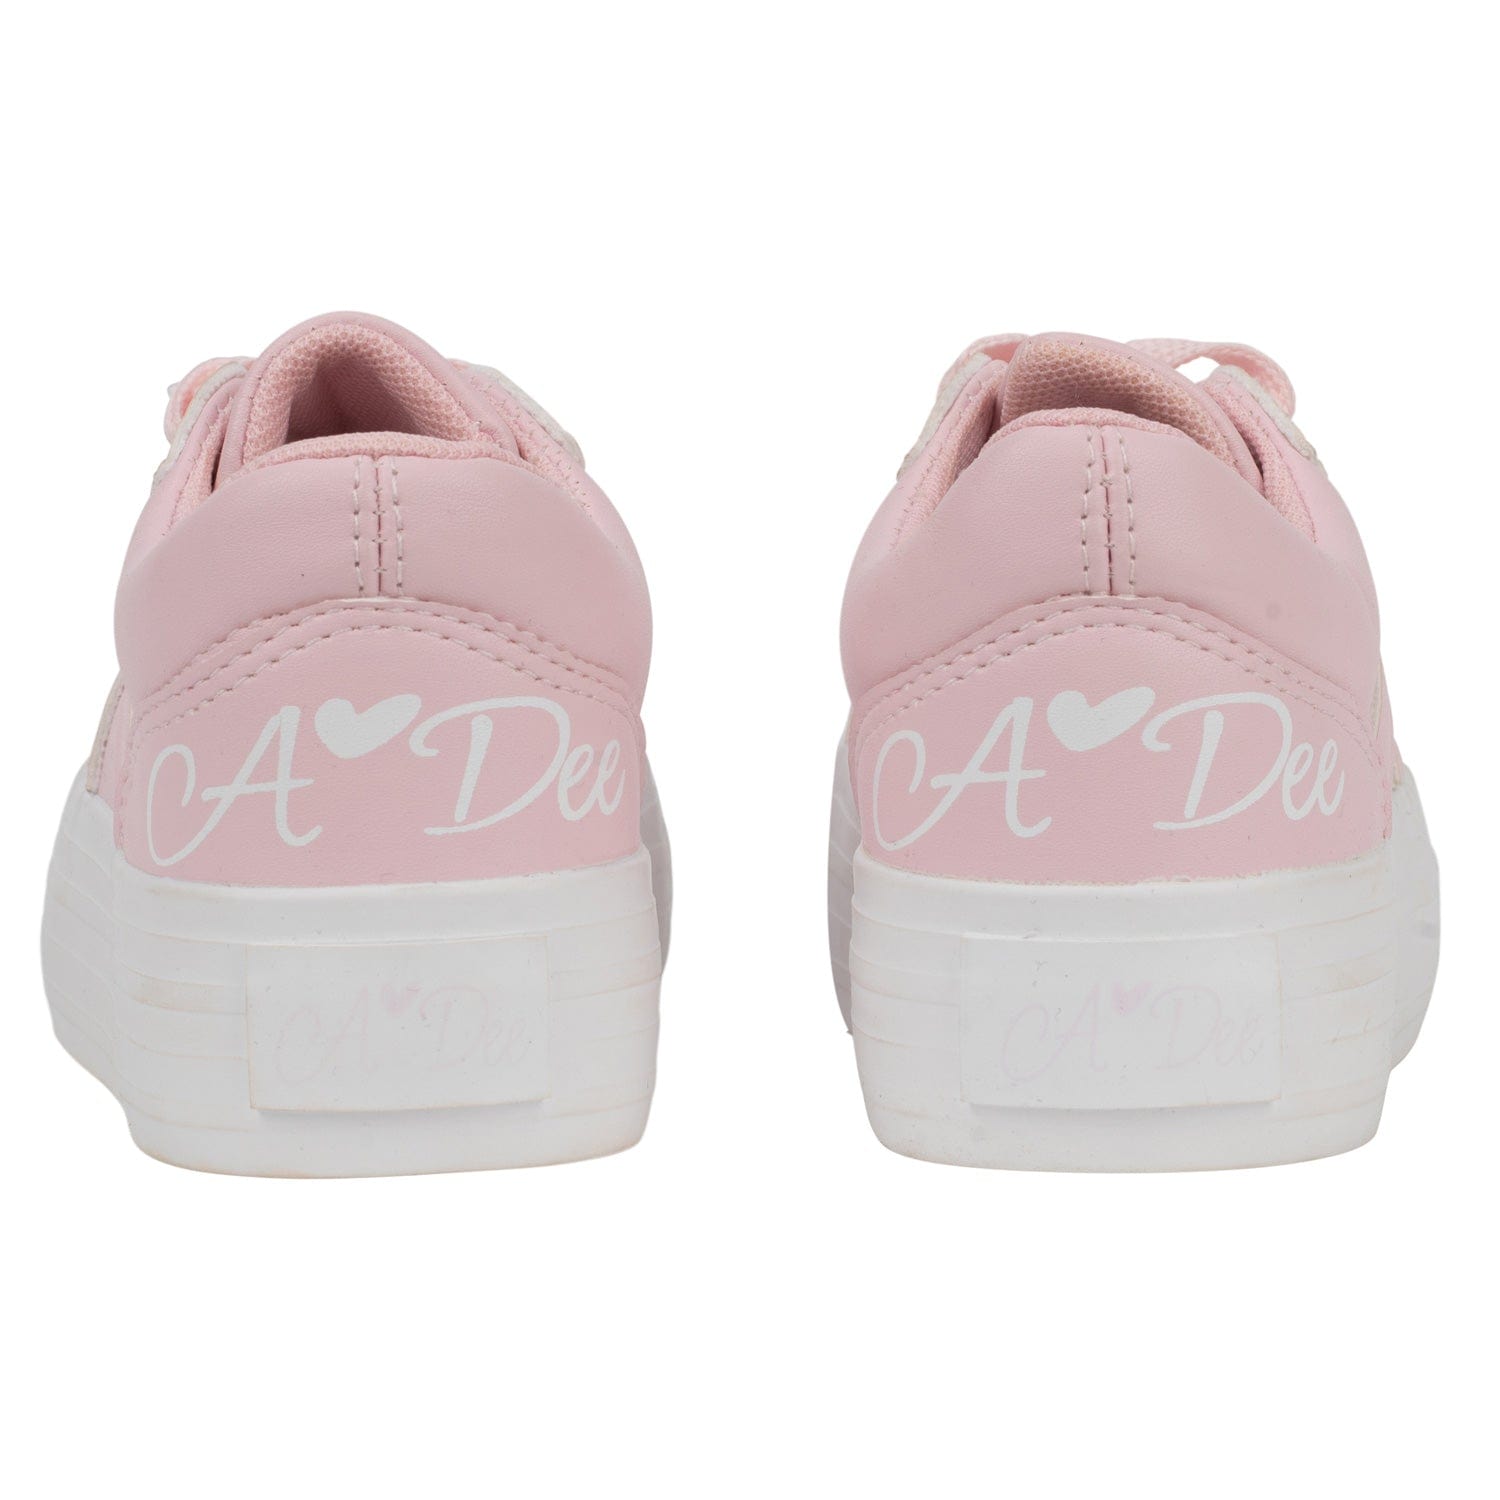 A-Dee Shoes S245101- 4001 Adee Girls Patty Pink Fairy Platform Trainer